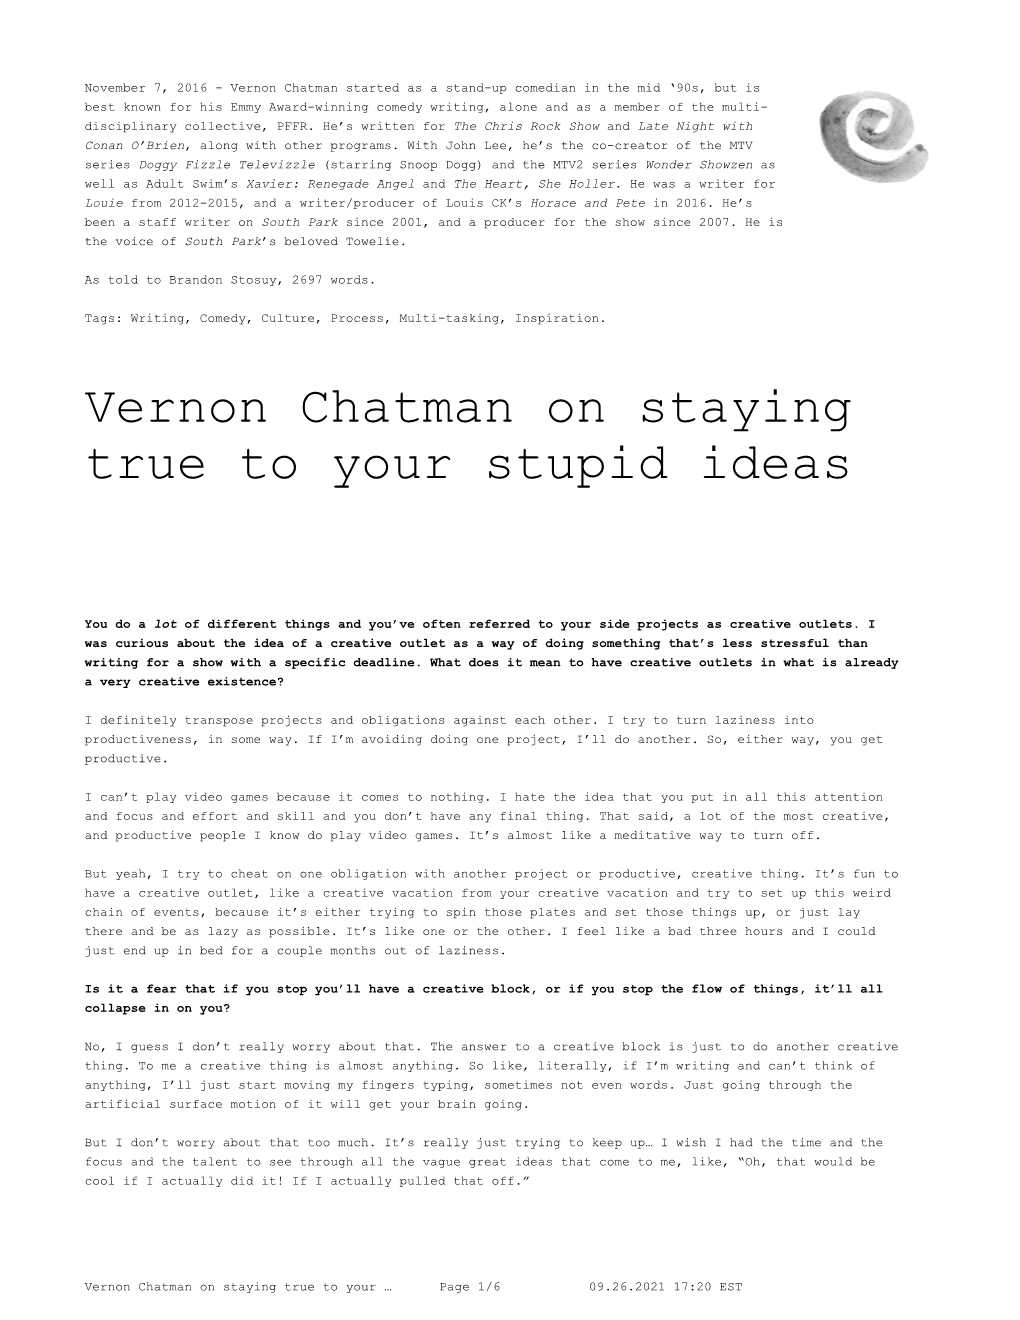 Vernon Chatman on Staying True to Your Stupid Ideas